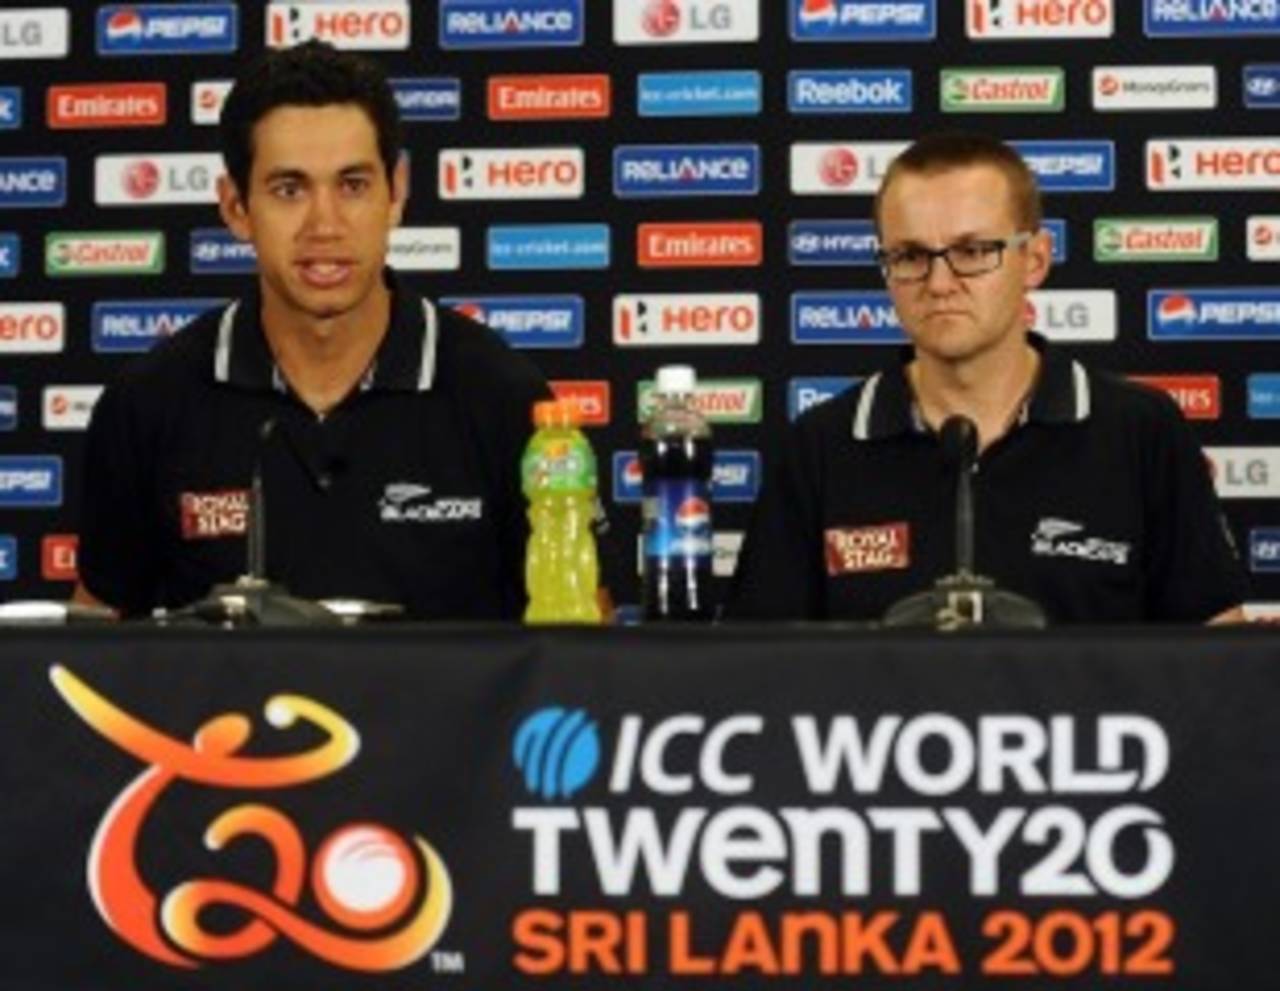 Ross Taylor and Mike Hesson, New Zealand's captain and coach, at a press conference, Colombo, World Twenty20 2012, September 13, 2012